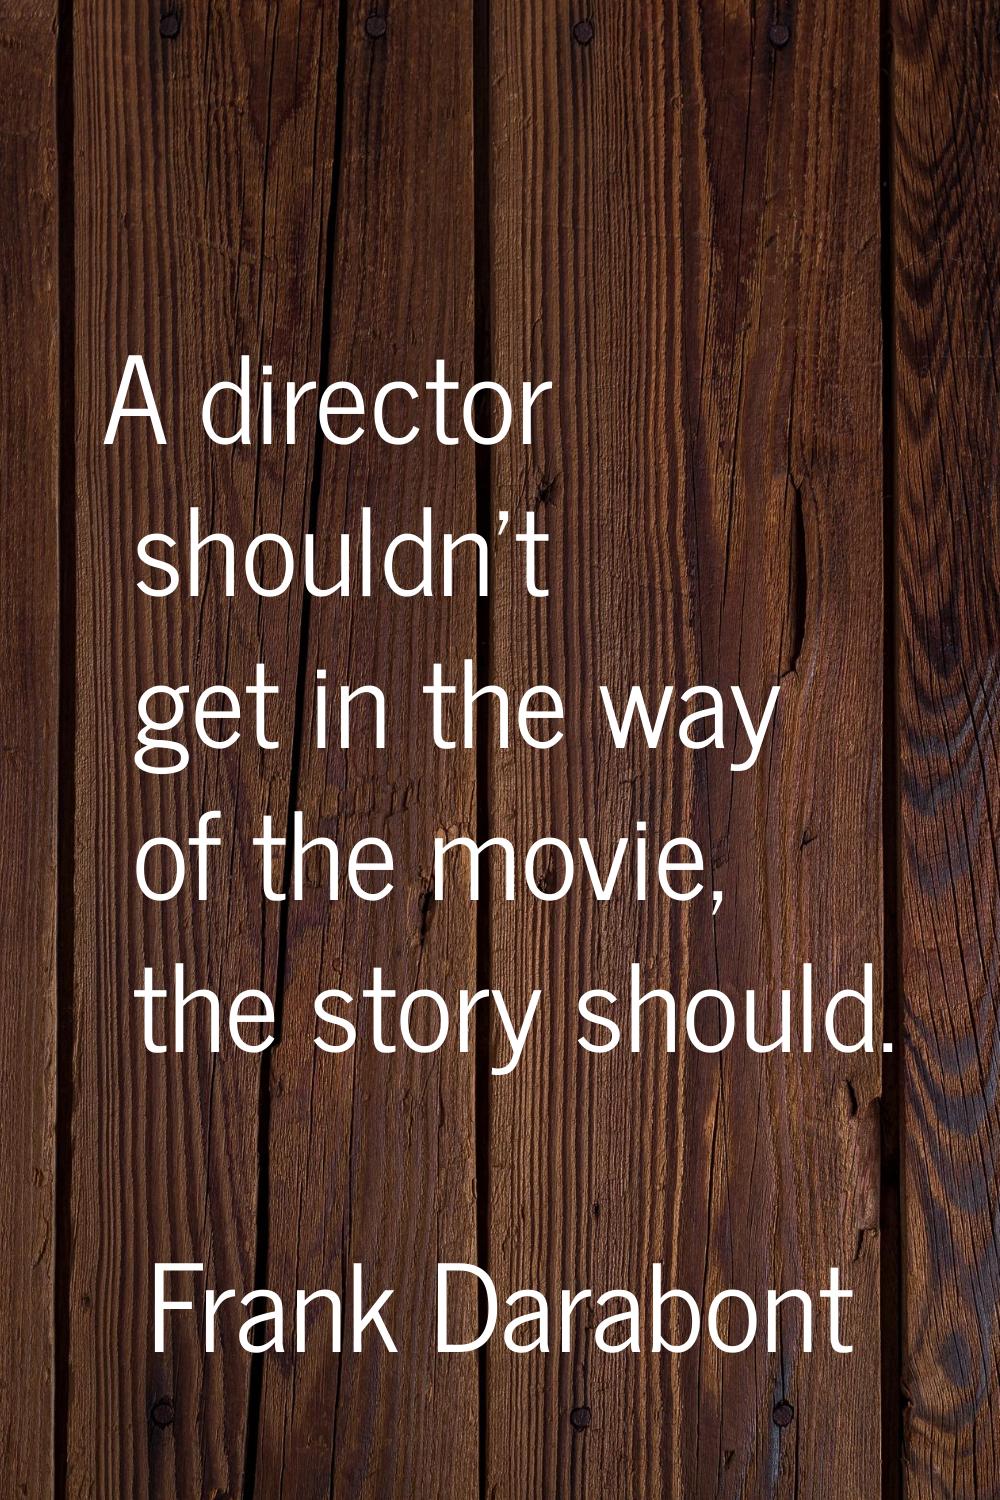 A director shouldn't get in the way of the movie, the story should.